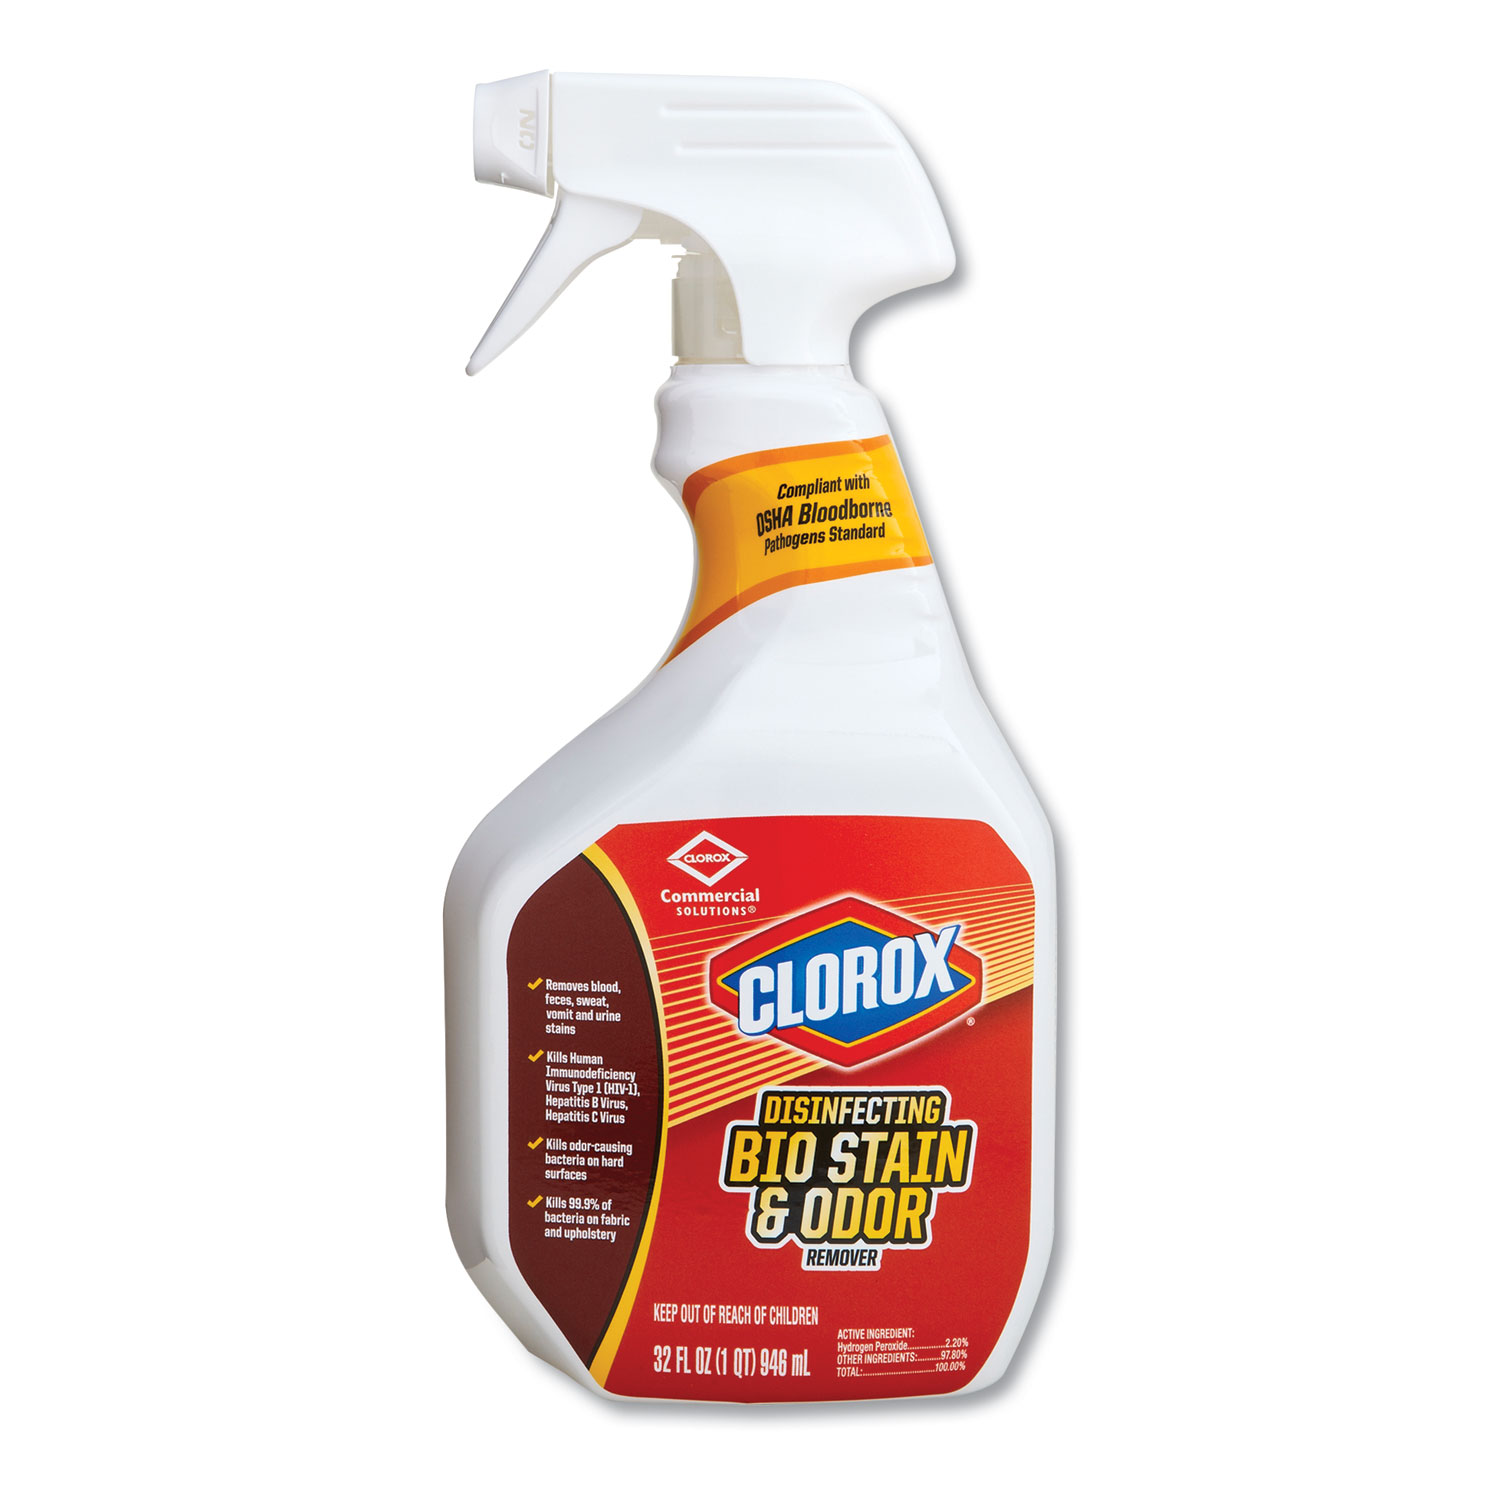  Clorox 31903 Disinfecting Bio Stain and Odor Remover, Fragranced, 32 oz Spray Bottle, 9/CT (CLO31903) 